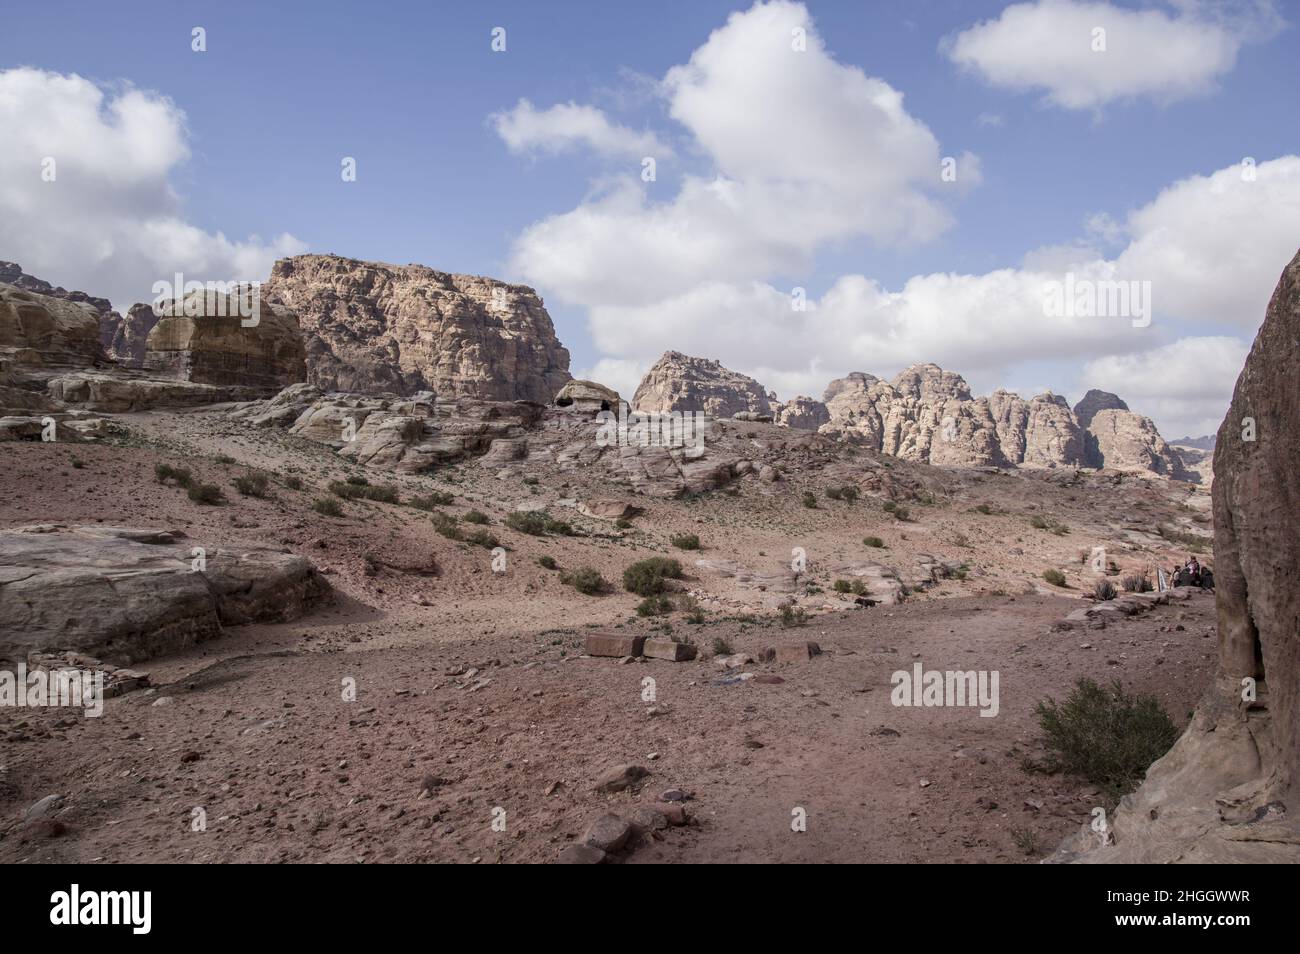 Petra Jordan, with canyons, caves, desert landscape where the Nabateans and then the Romans lived centuries ago. Stock Photo